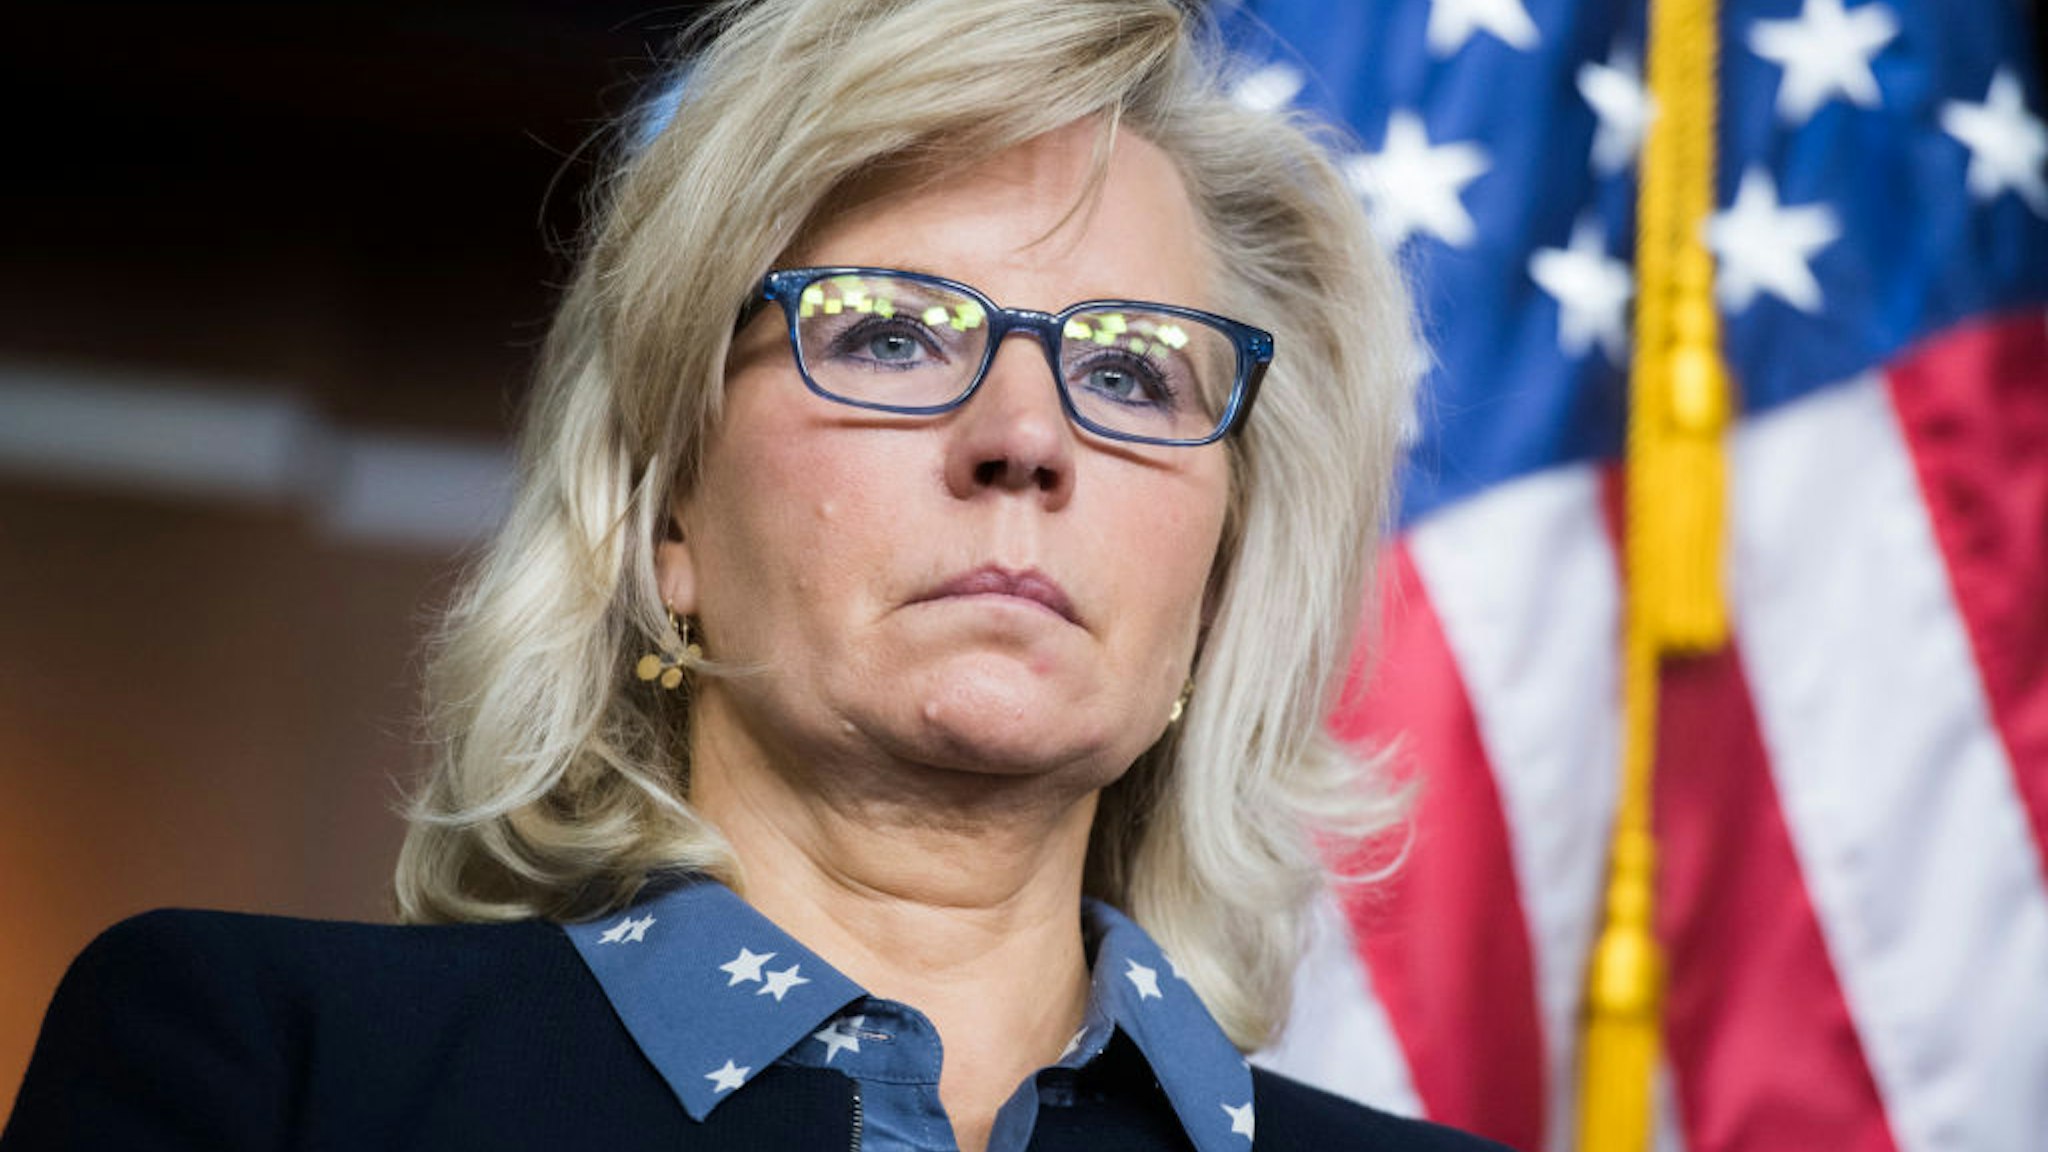 UNITED STATES - JUNE 4: Rep. Liz Cheney, R-Wyo., chair of the House Republican Conference, conducts a news conference after a meeting in the Capitol Visitor Center on Tuesday, June 4, 2019.